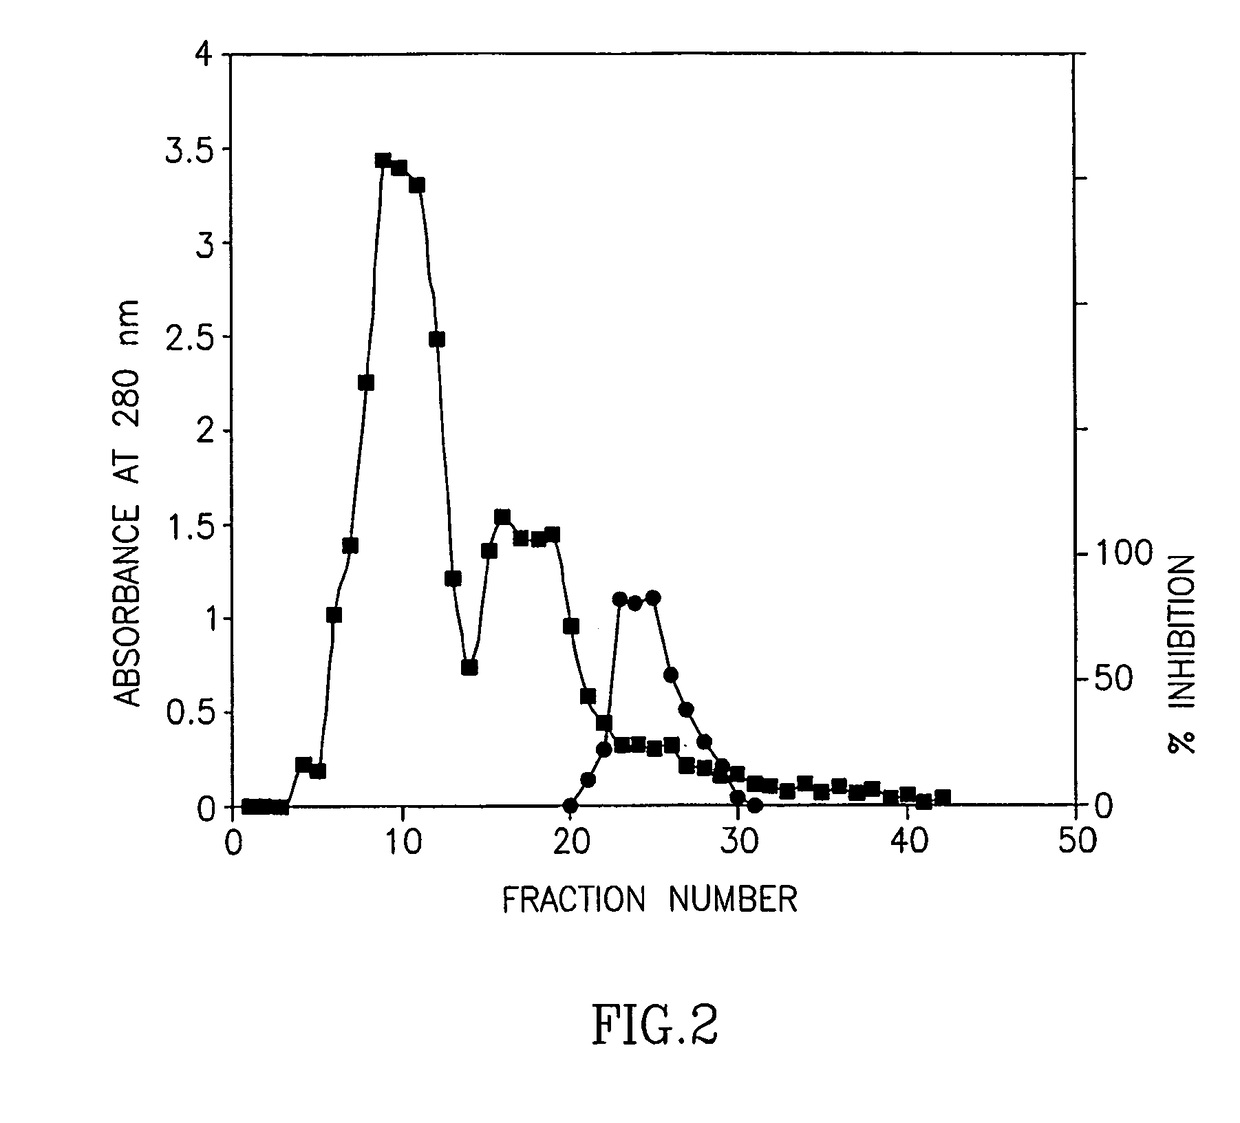 Debriding composition from bromelain and methods of production thereof